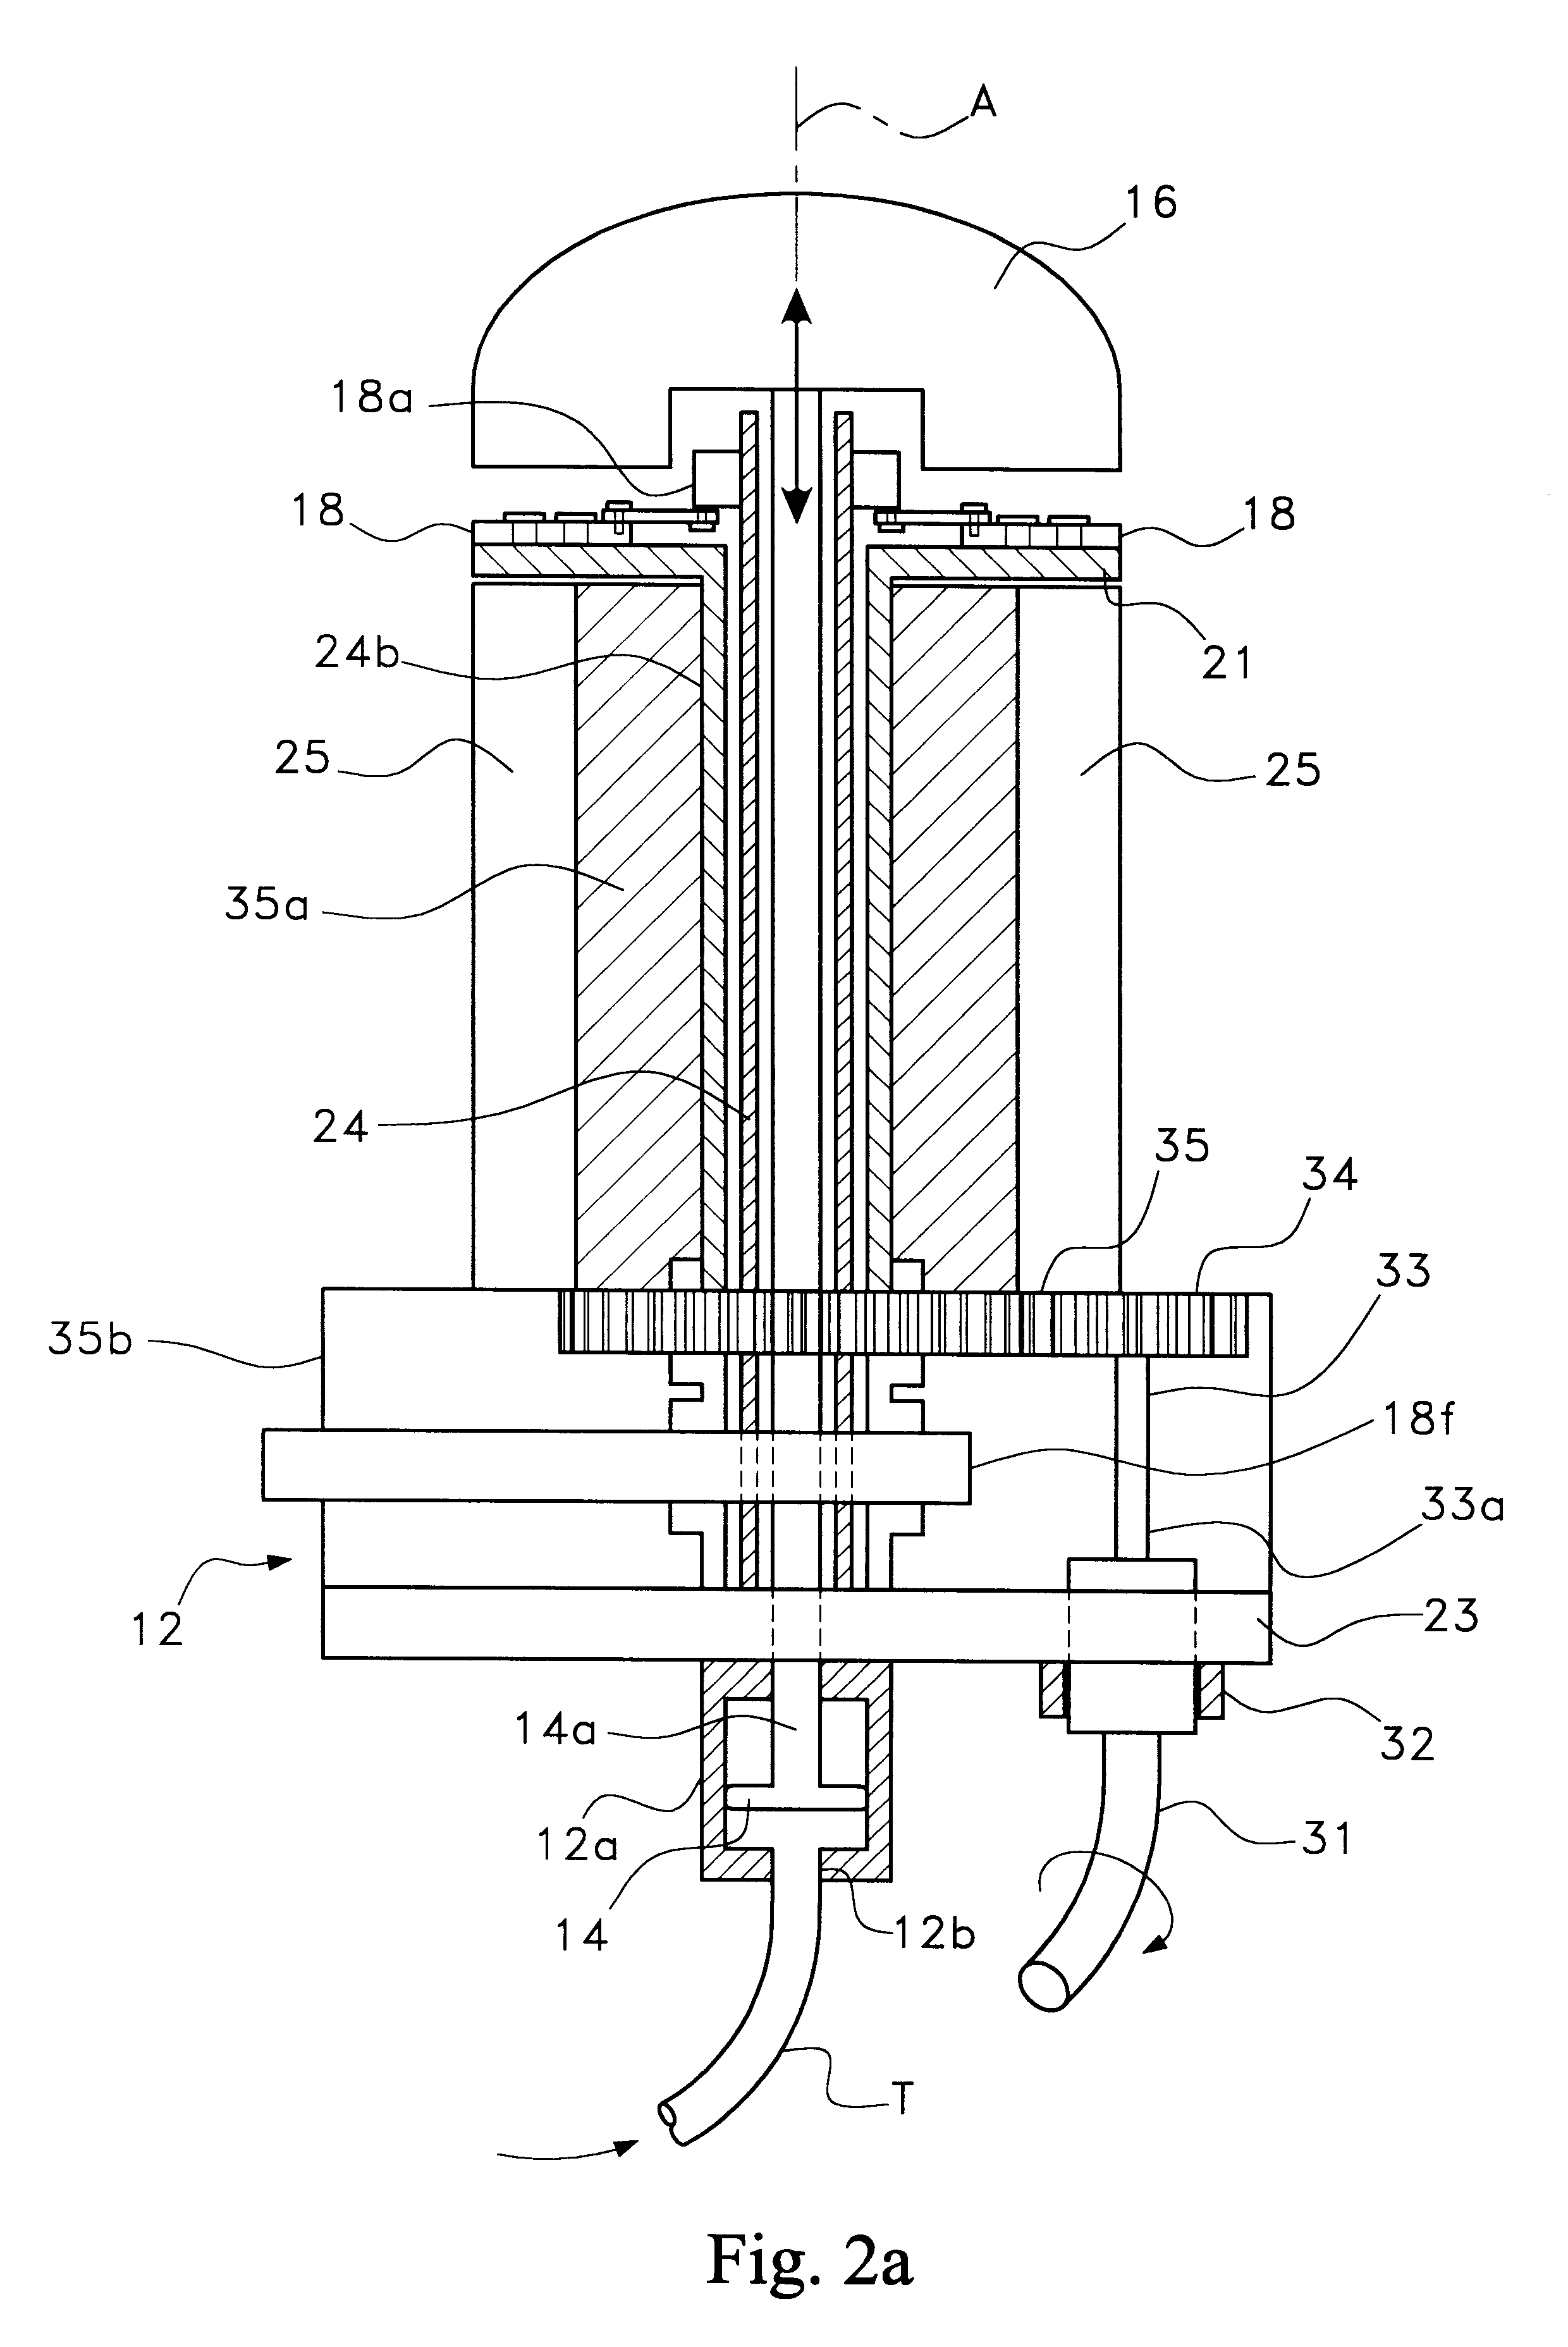 Method and apparatus for shaping a site for anchoring an implant and to provide bone augementation and shape conformity